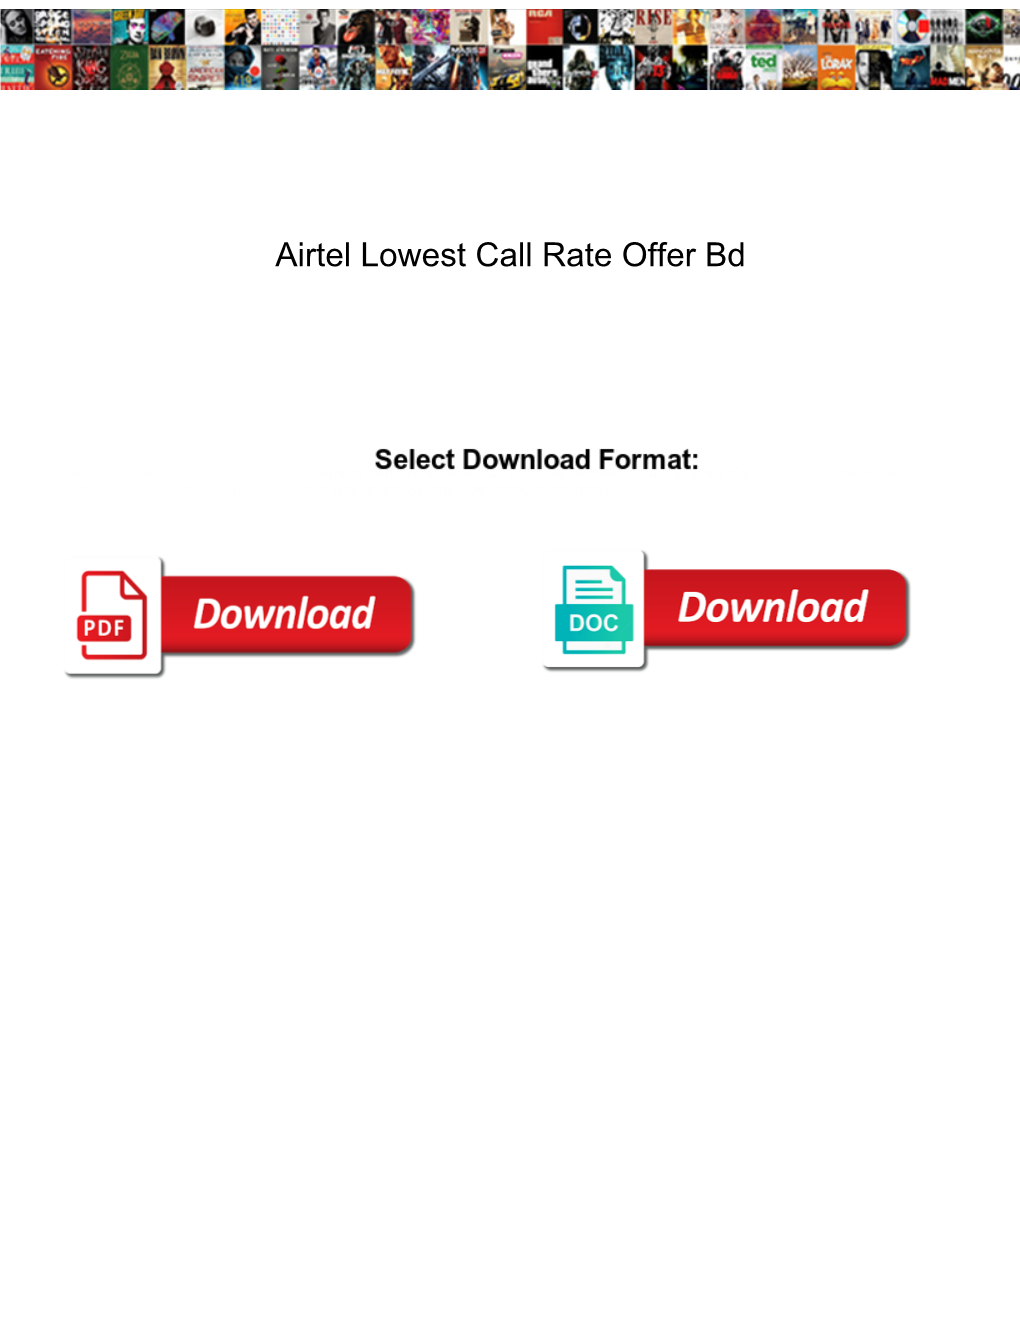 Airtel Lowest Call Rate Offer Bd